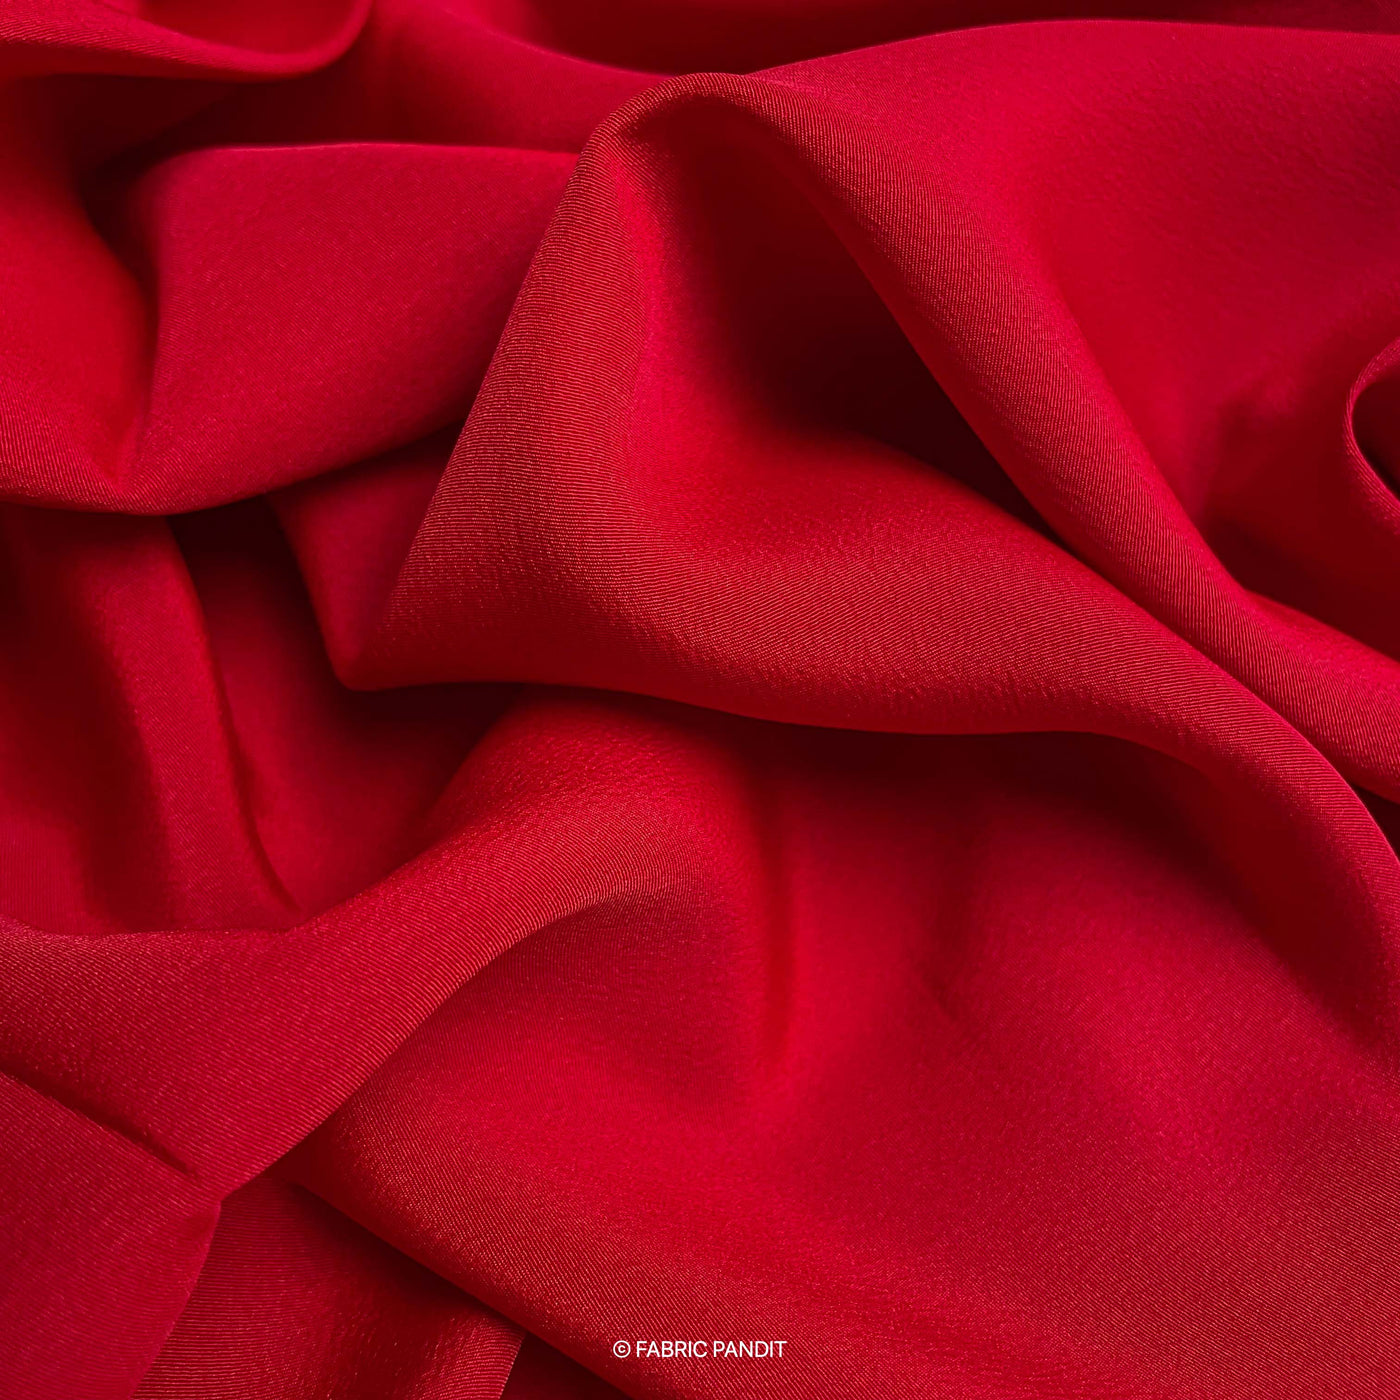 Fabric Pandit Cut Piece 0.50M (CUT PIECE) Carmine Red Color Premium French Crepe Fabric (Width 44 inches)